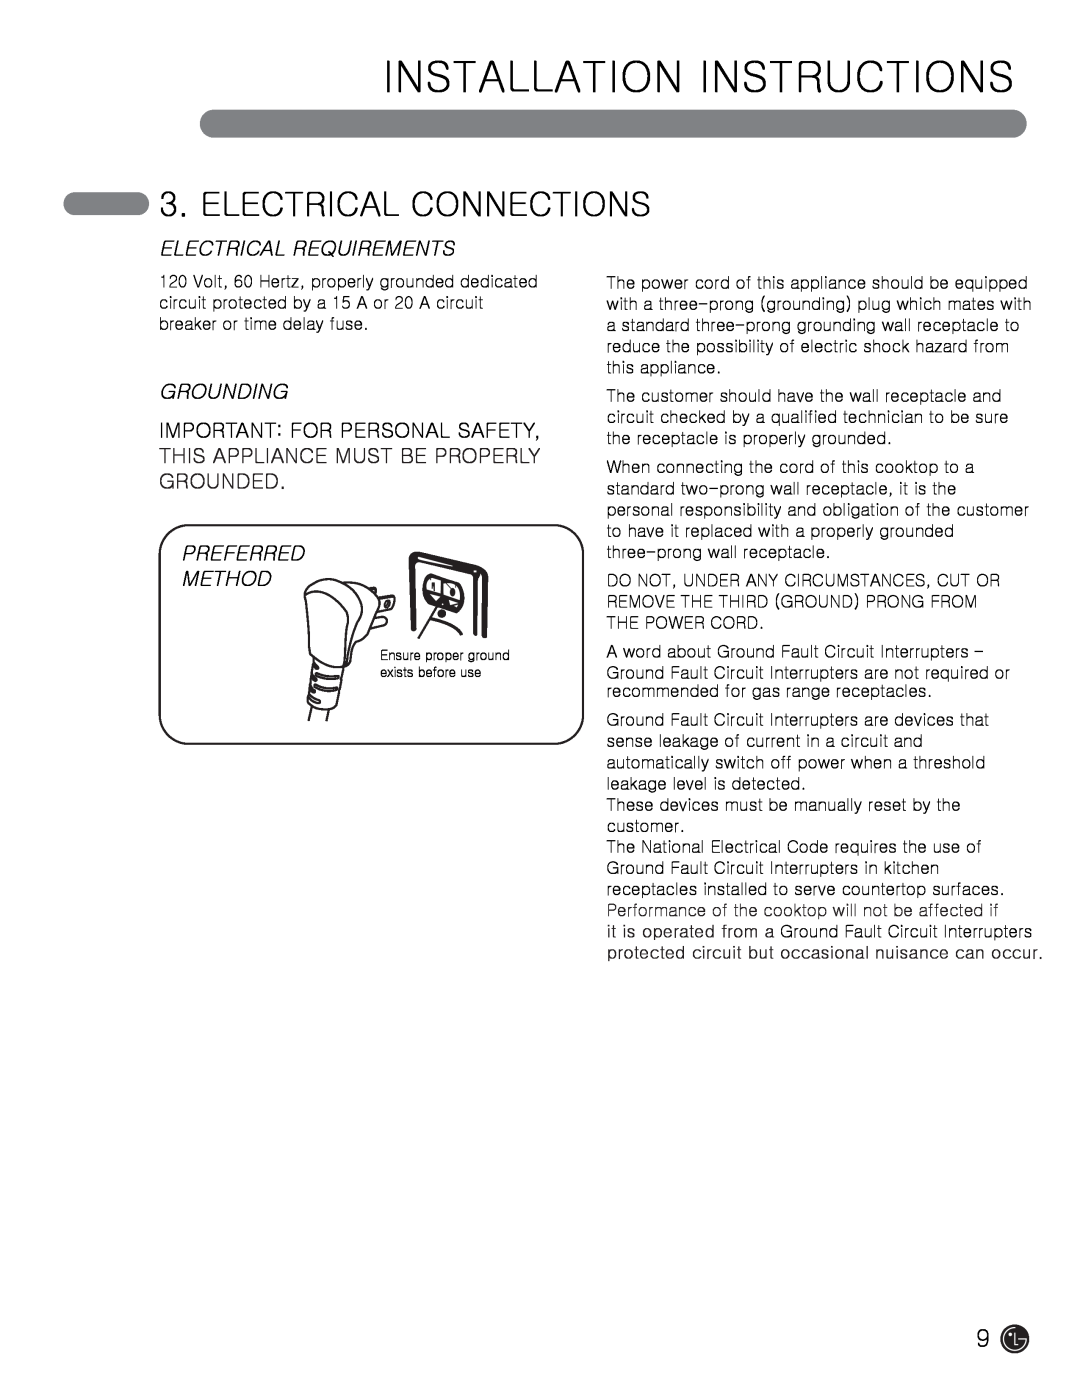 LG Electronics MFL62725501 Electrical Connections, Electrical Requirements, Grounding, Preferred Method 